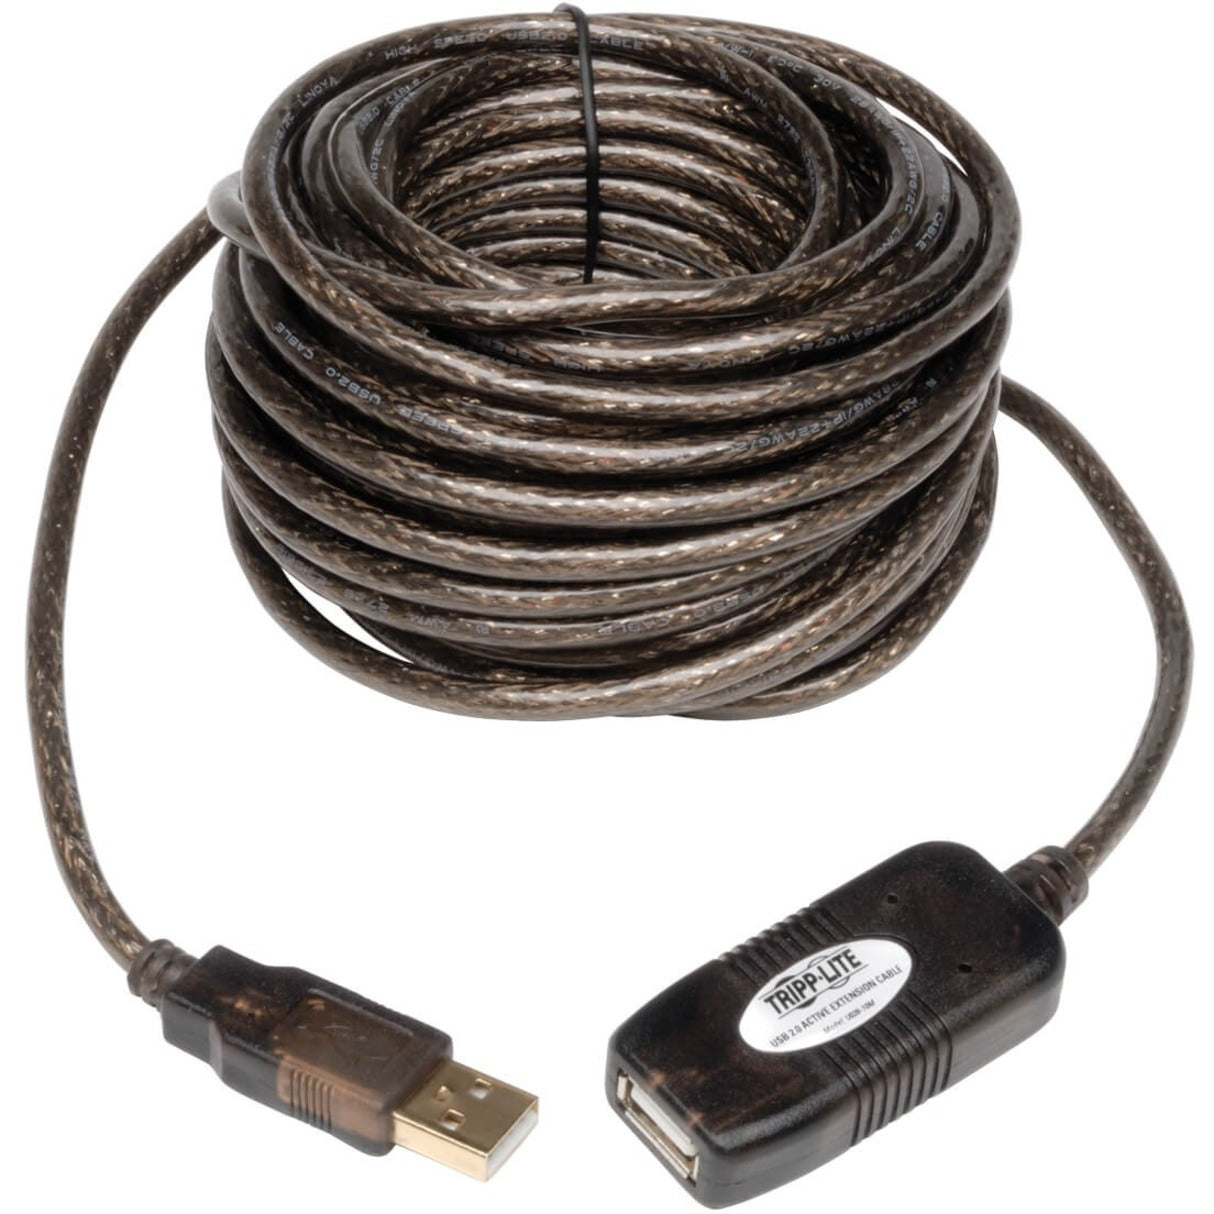 Tripp Lite U026-10M 10-meter USB2.0 A/A Hi-Speed Active Extension / Repeater Cable, 33 ft. Length